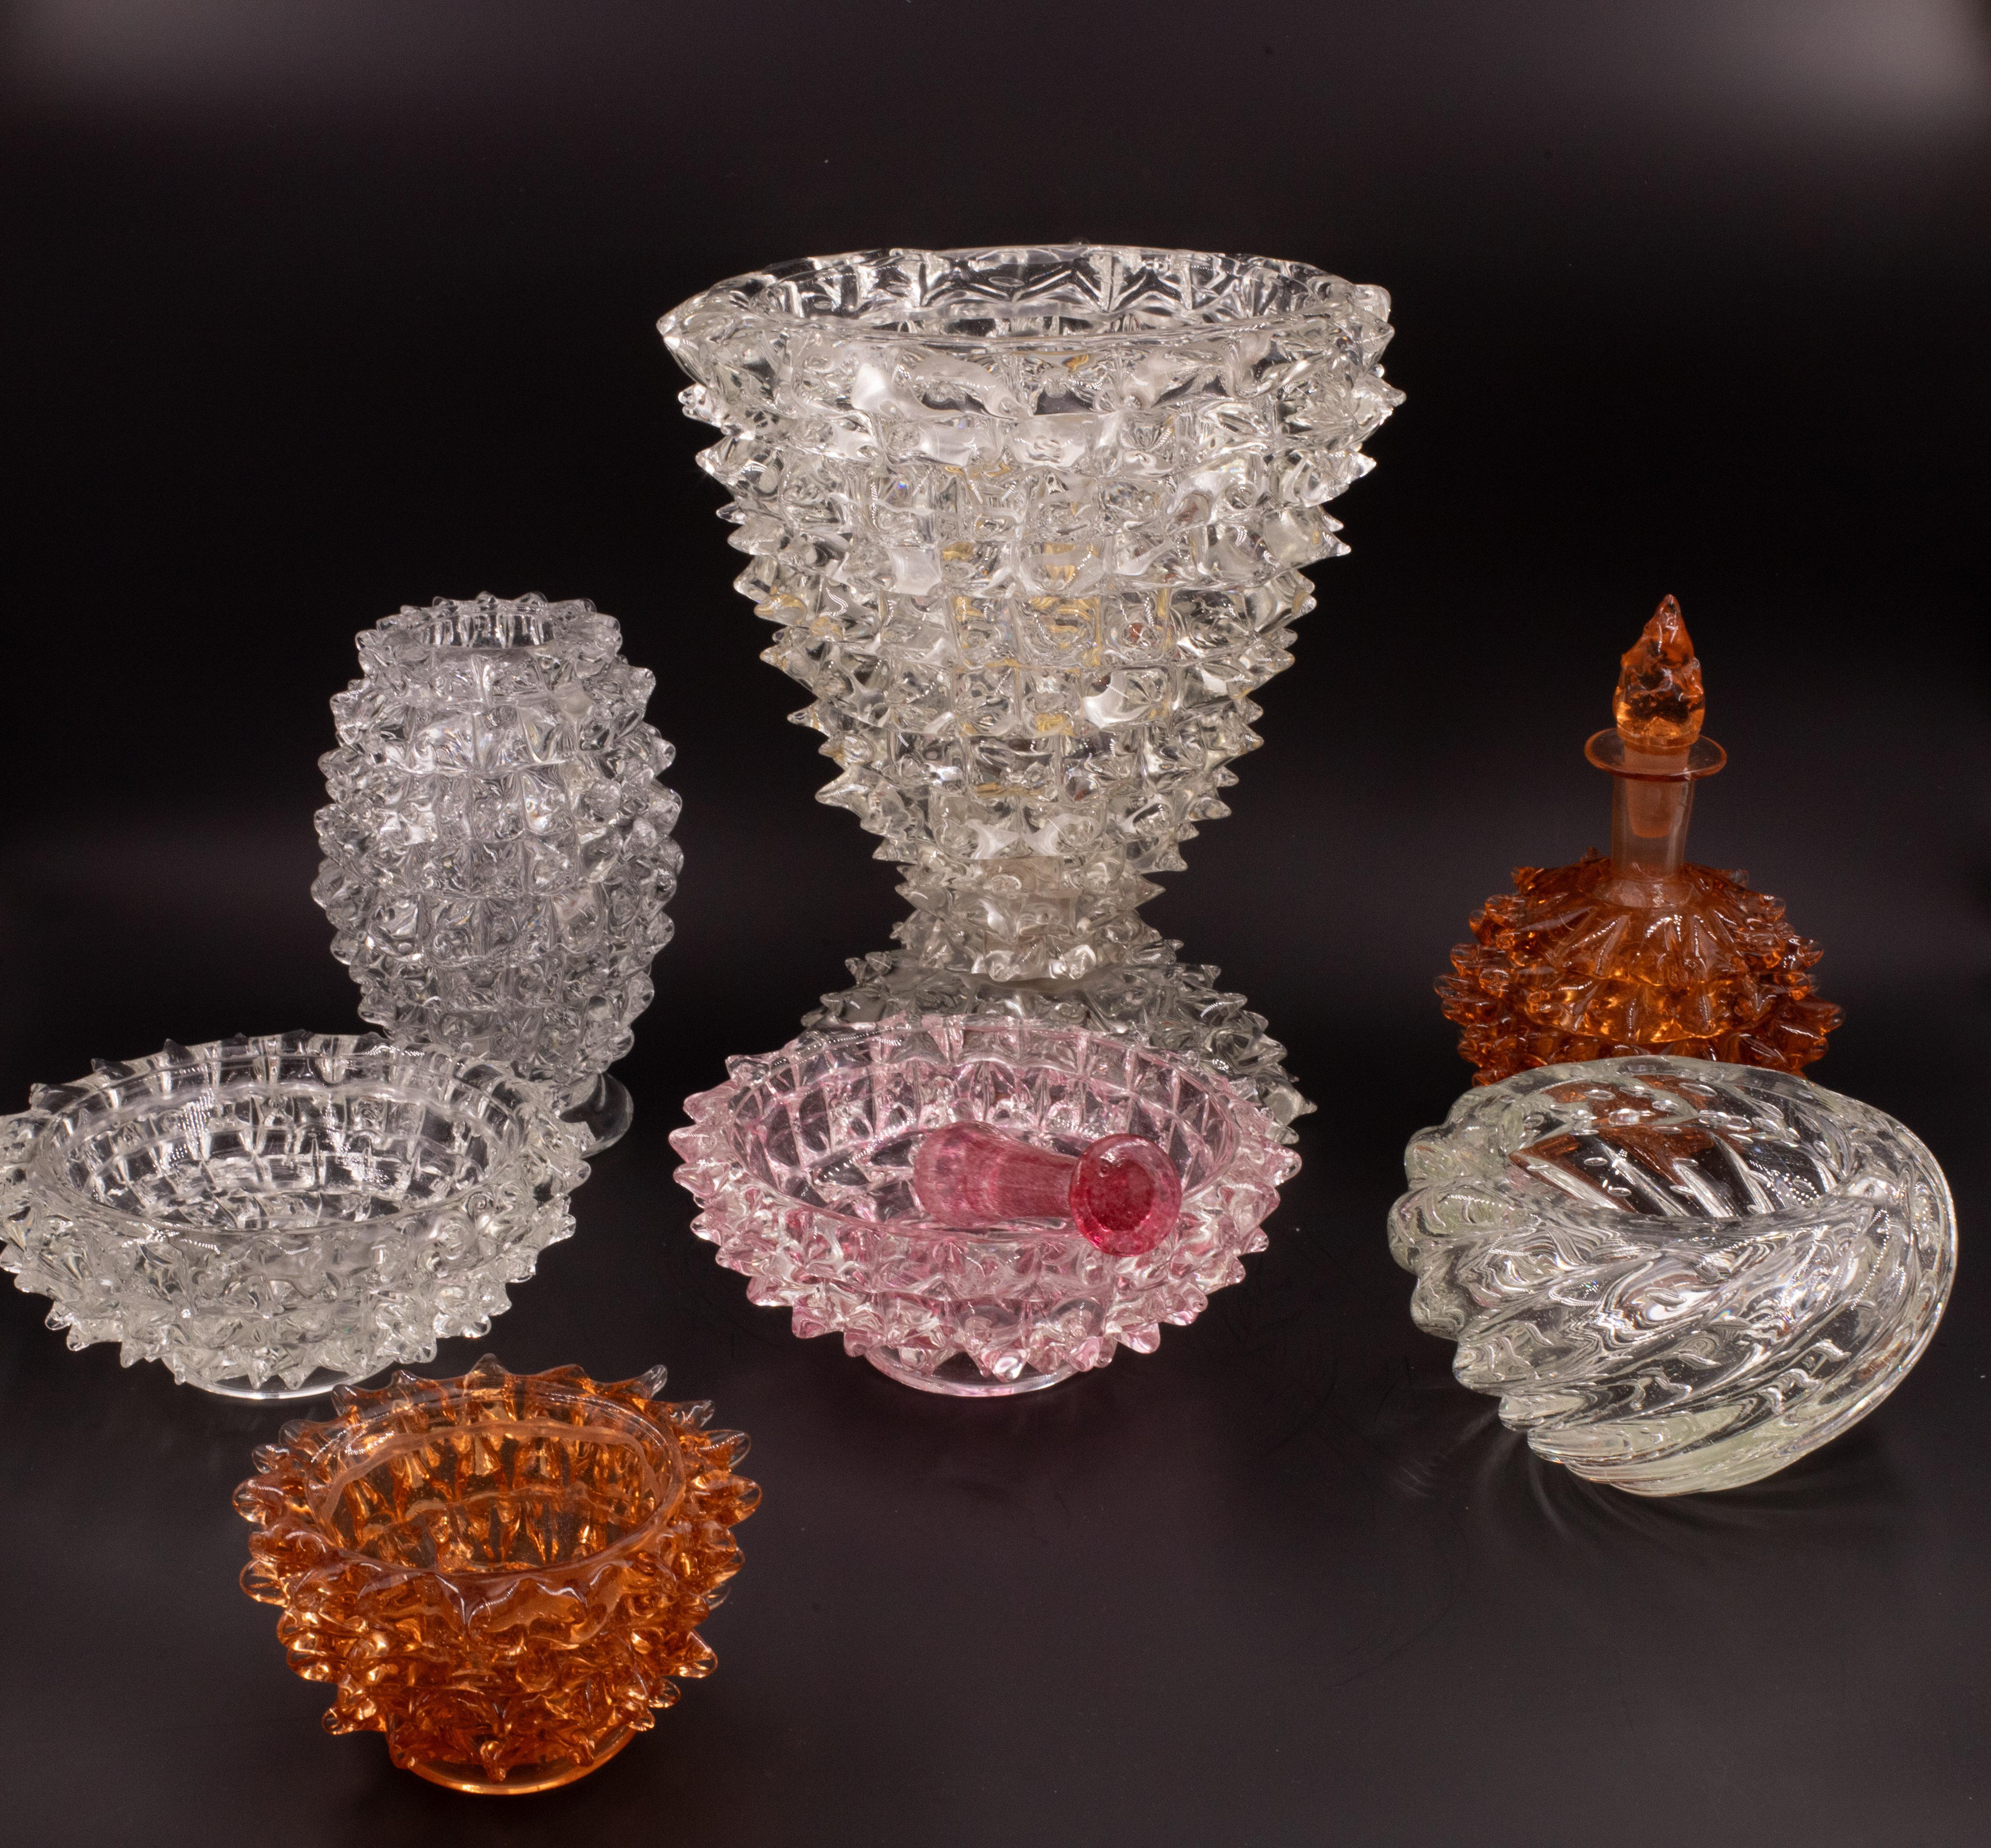 Set of 2 Bubbles Glass Vase by Barovier e Toso, 1950s For Sale 4